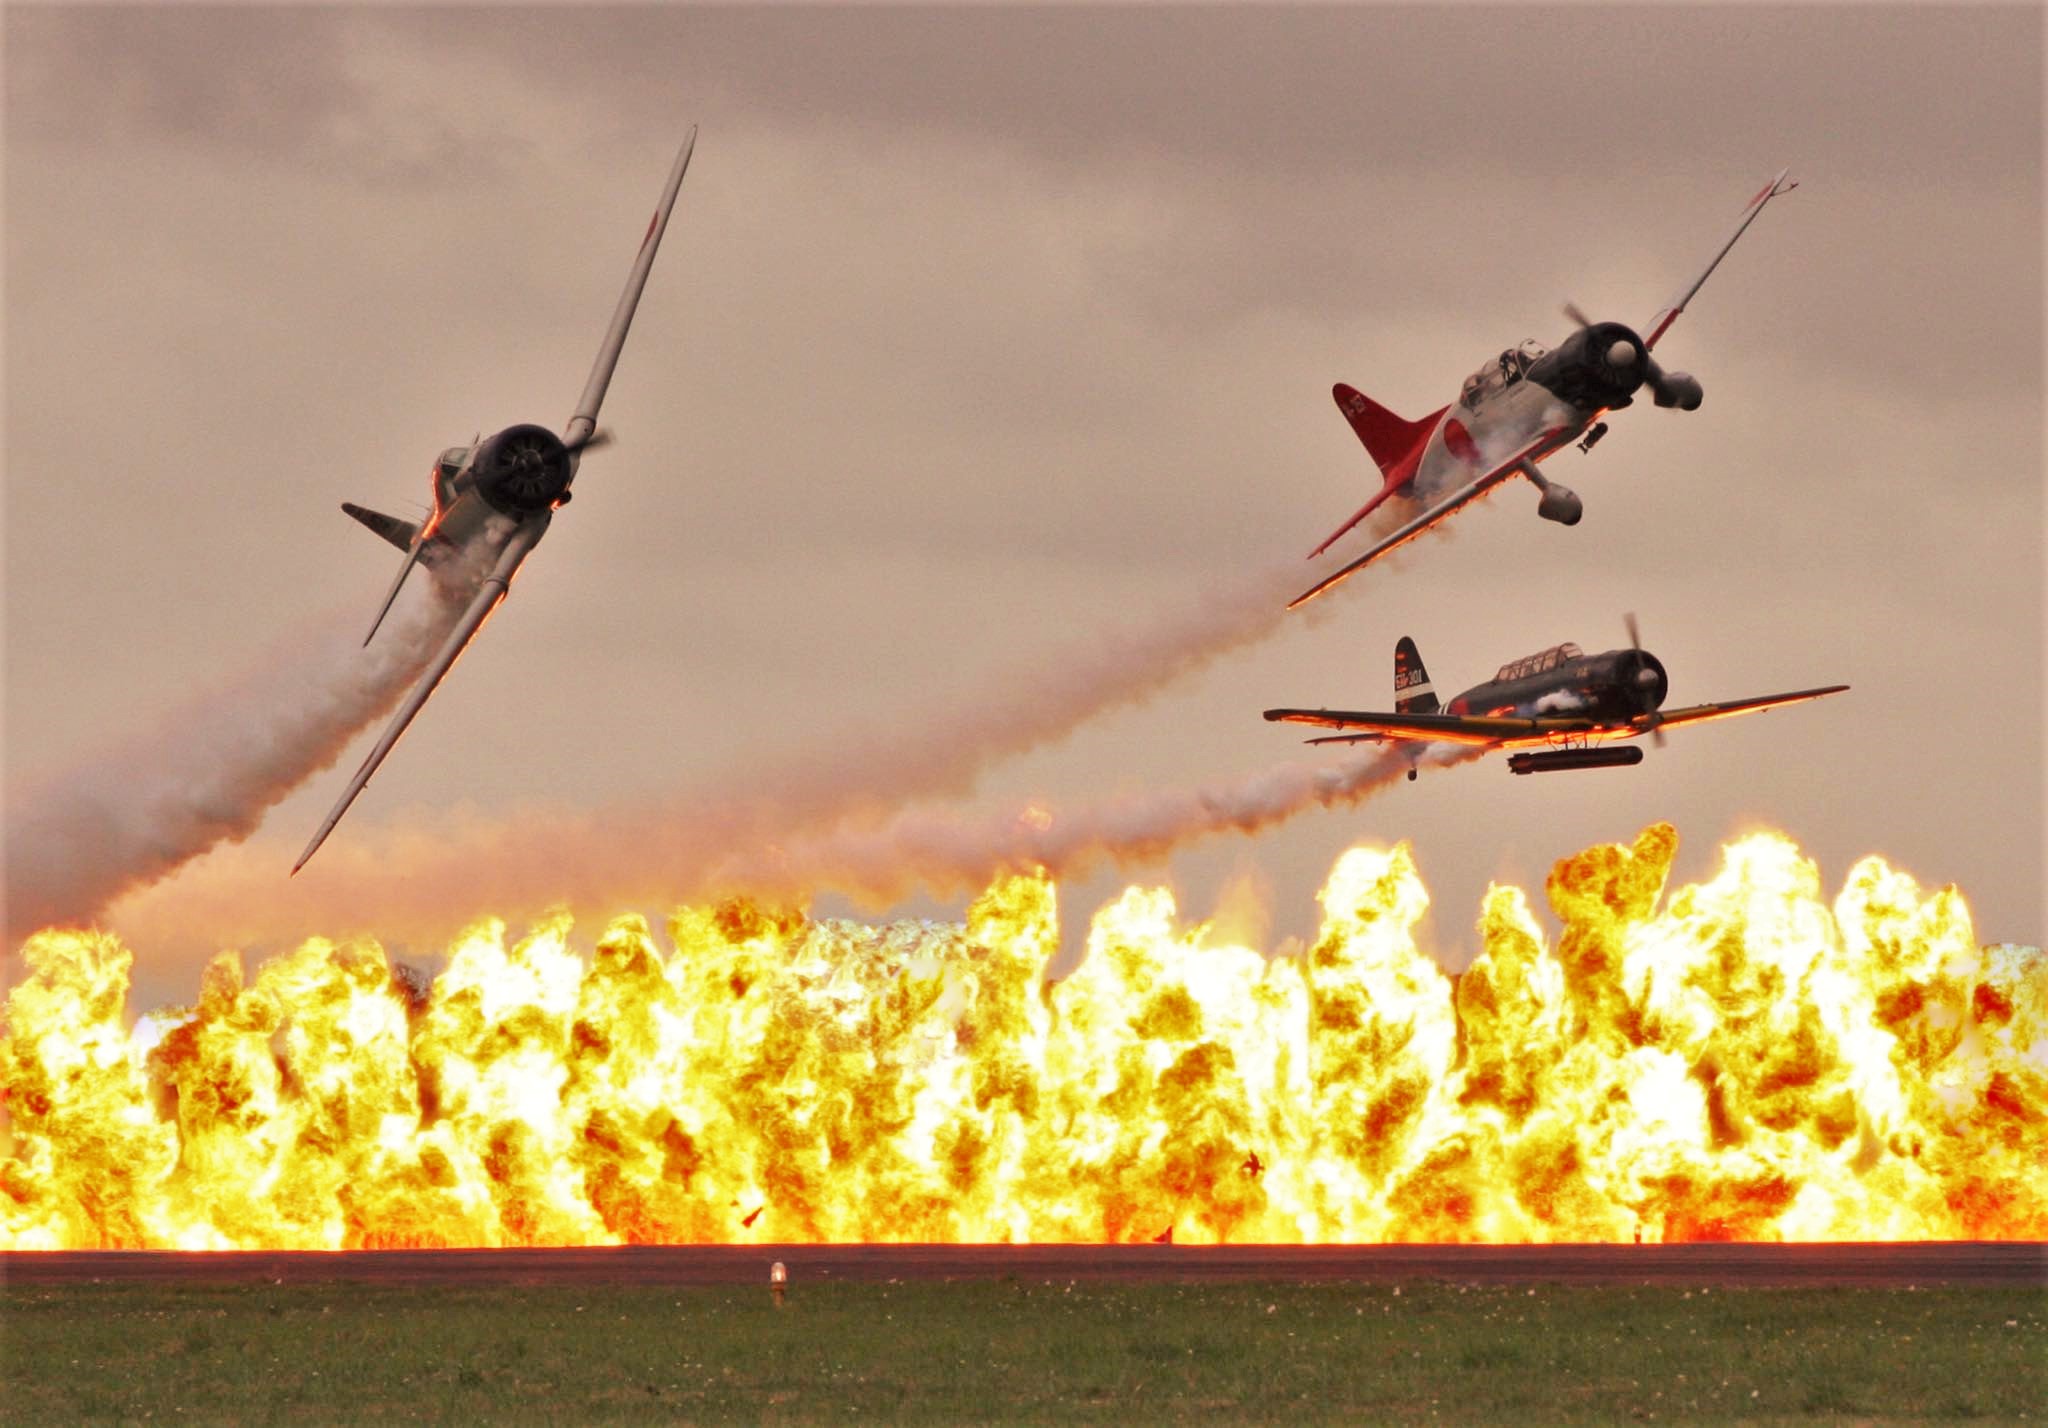 TORA Aircraft Over a Wall of Flames